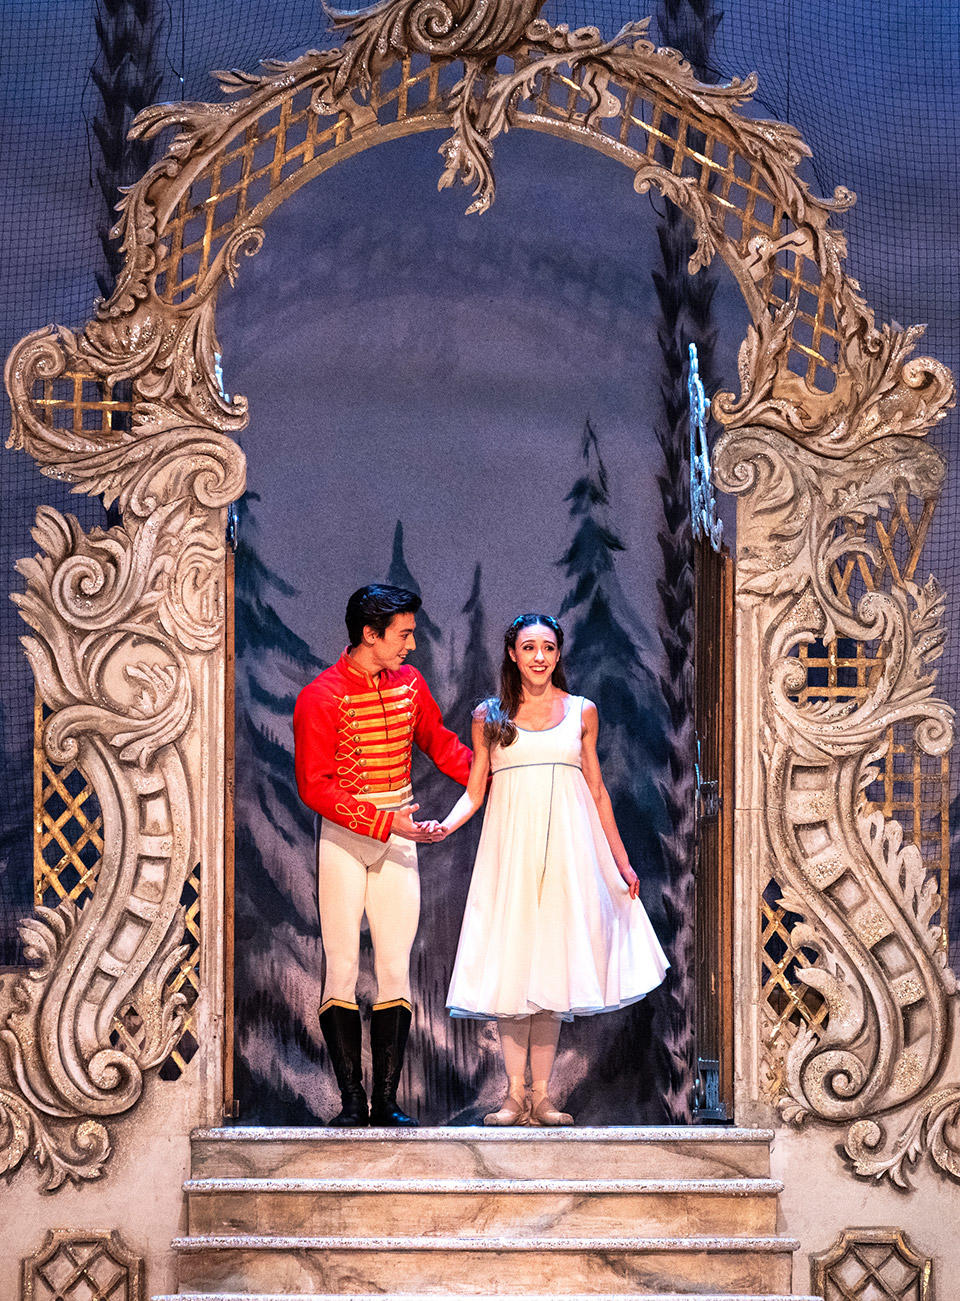 Luca-Acri-as-Hans-Peter-and-Isabella-Gasparini-as-Clara-in-The-Nutcracker,-The-Royal-Ballet-©2021-ROH.-Photograph-by-Foteini-Christofilopoulou-(2).jpg